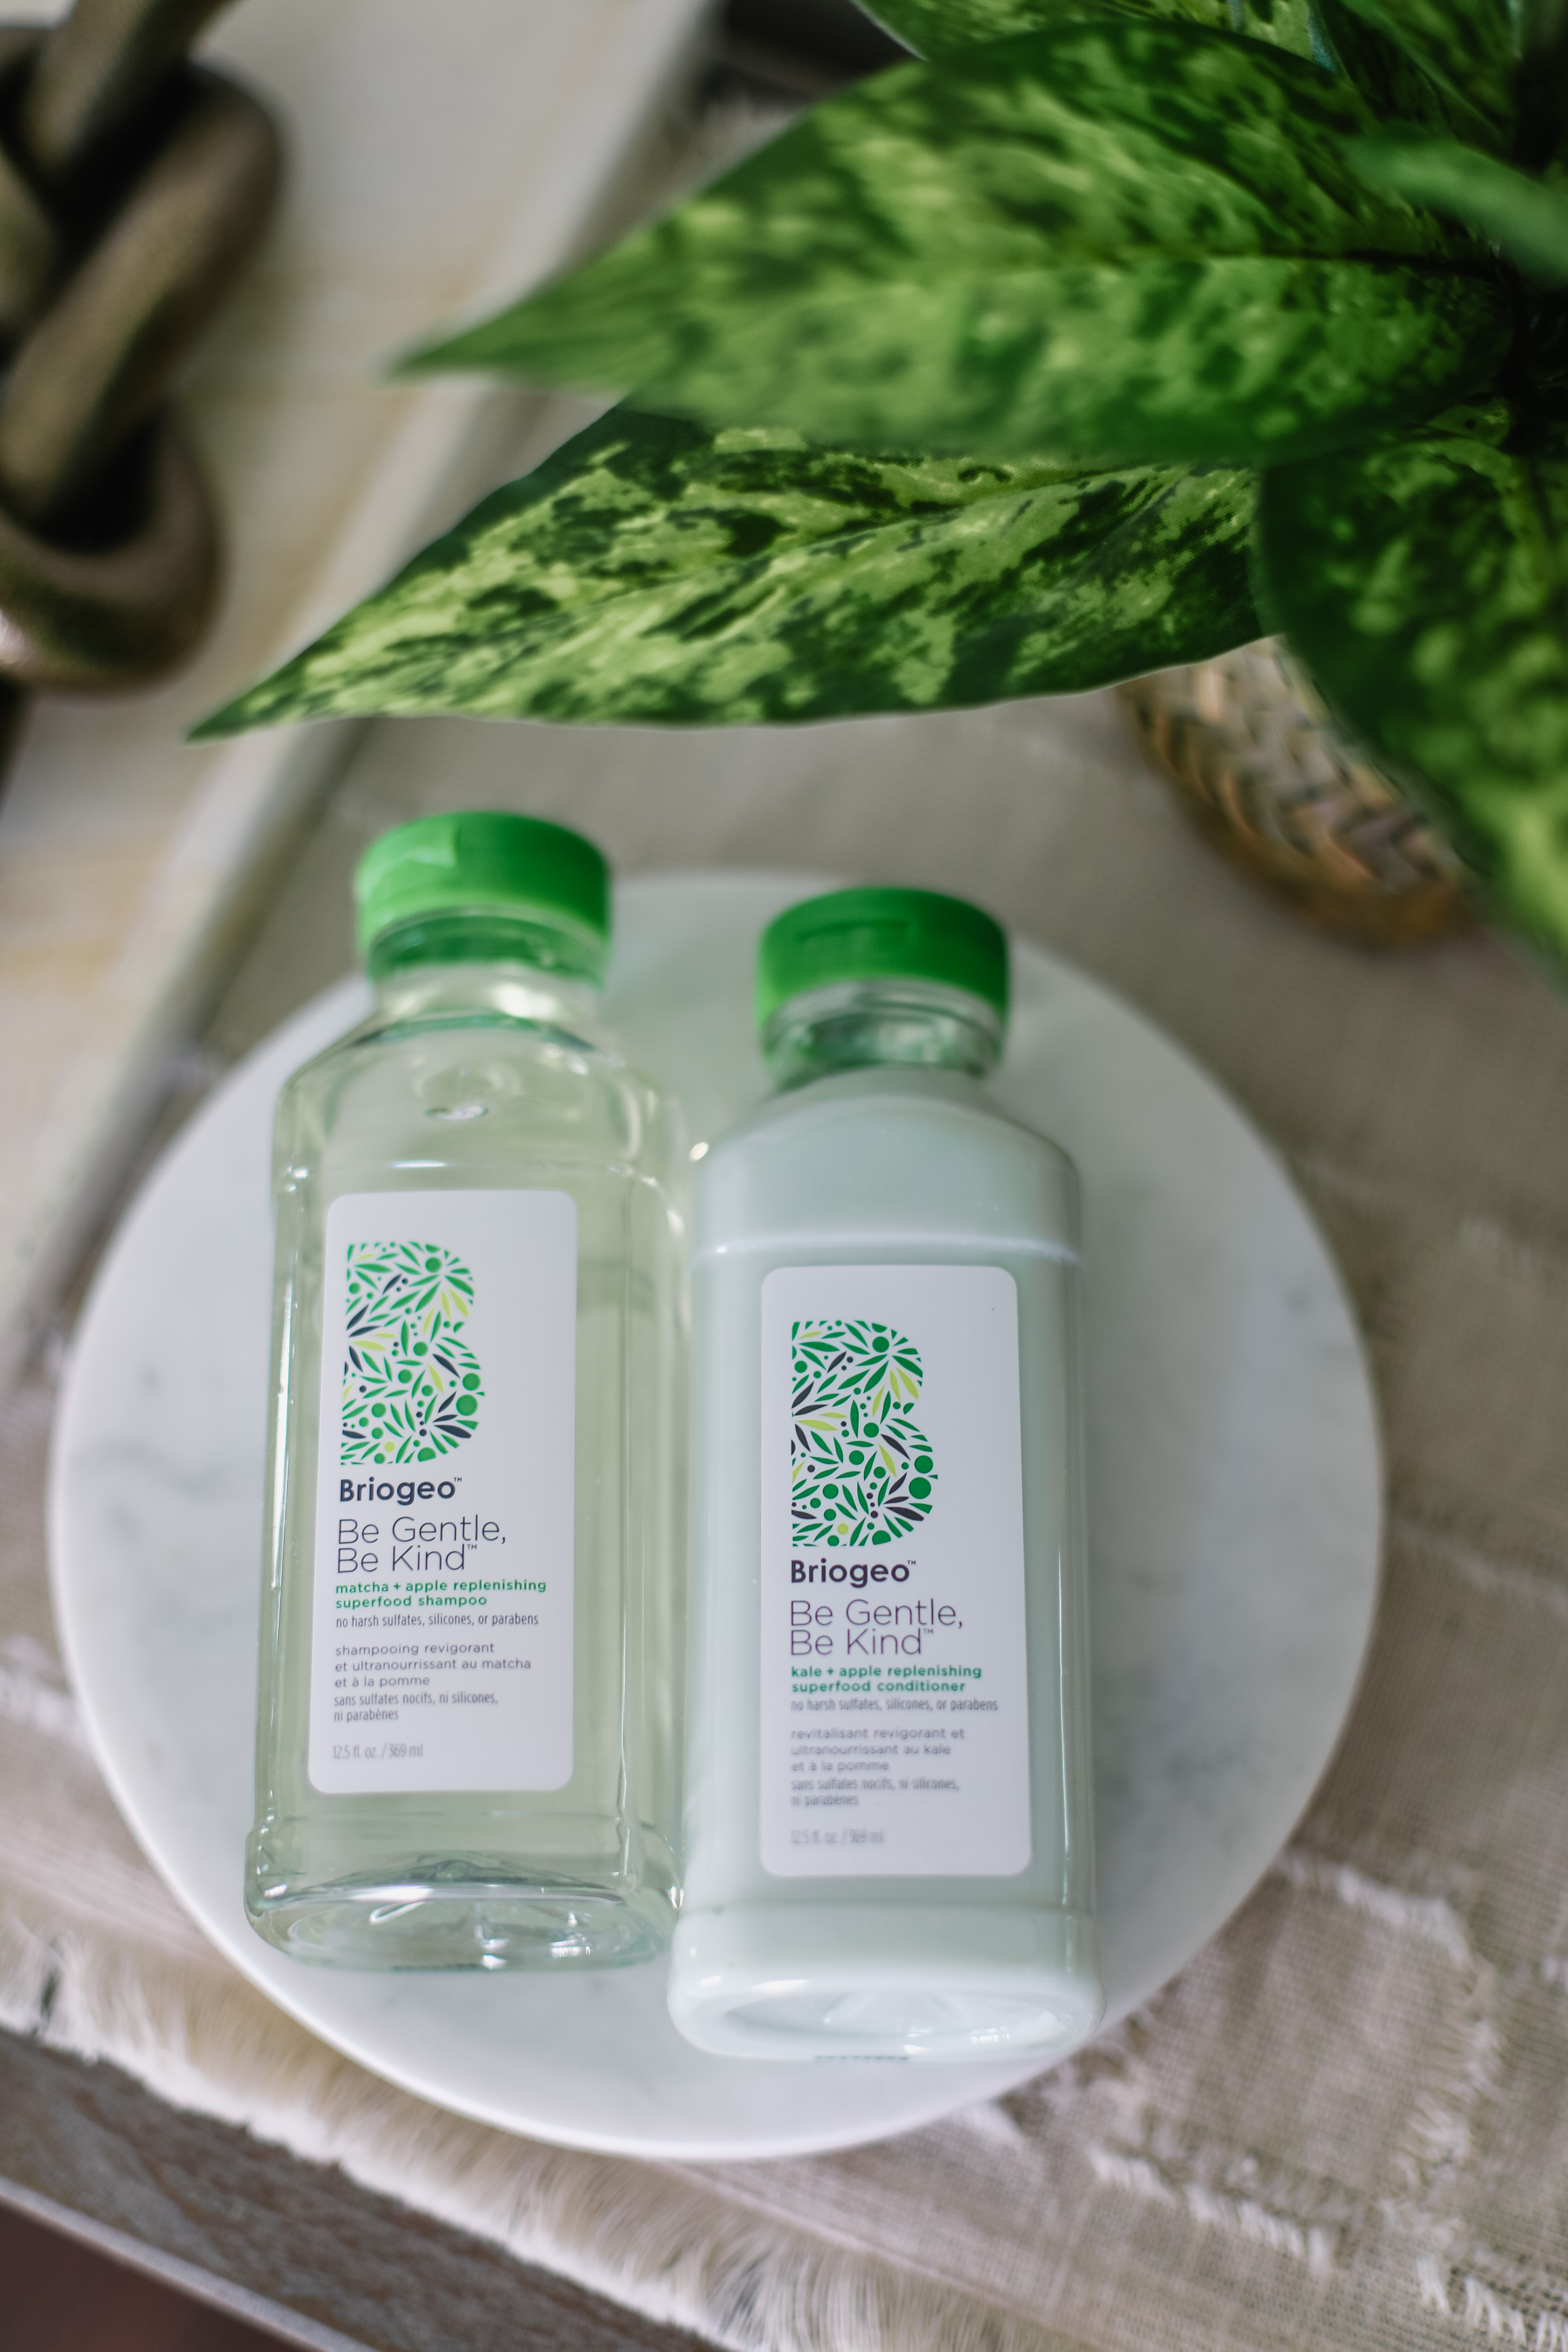 Briogeo Shampoo and Conditioner Reviews | Be Gentle, Be Kind Matcha + Apple Replenishing Shampoo | Affordable by Amanda